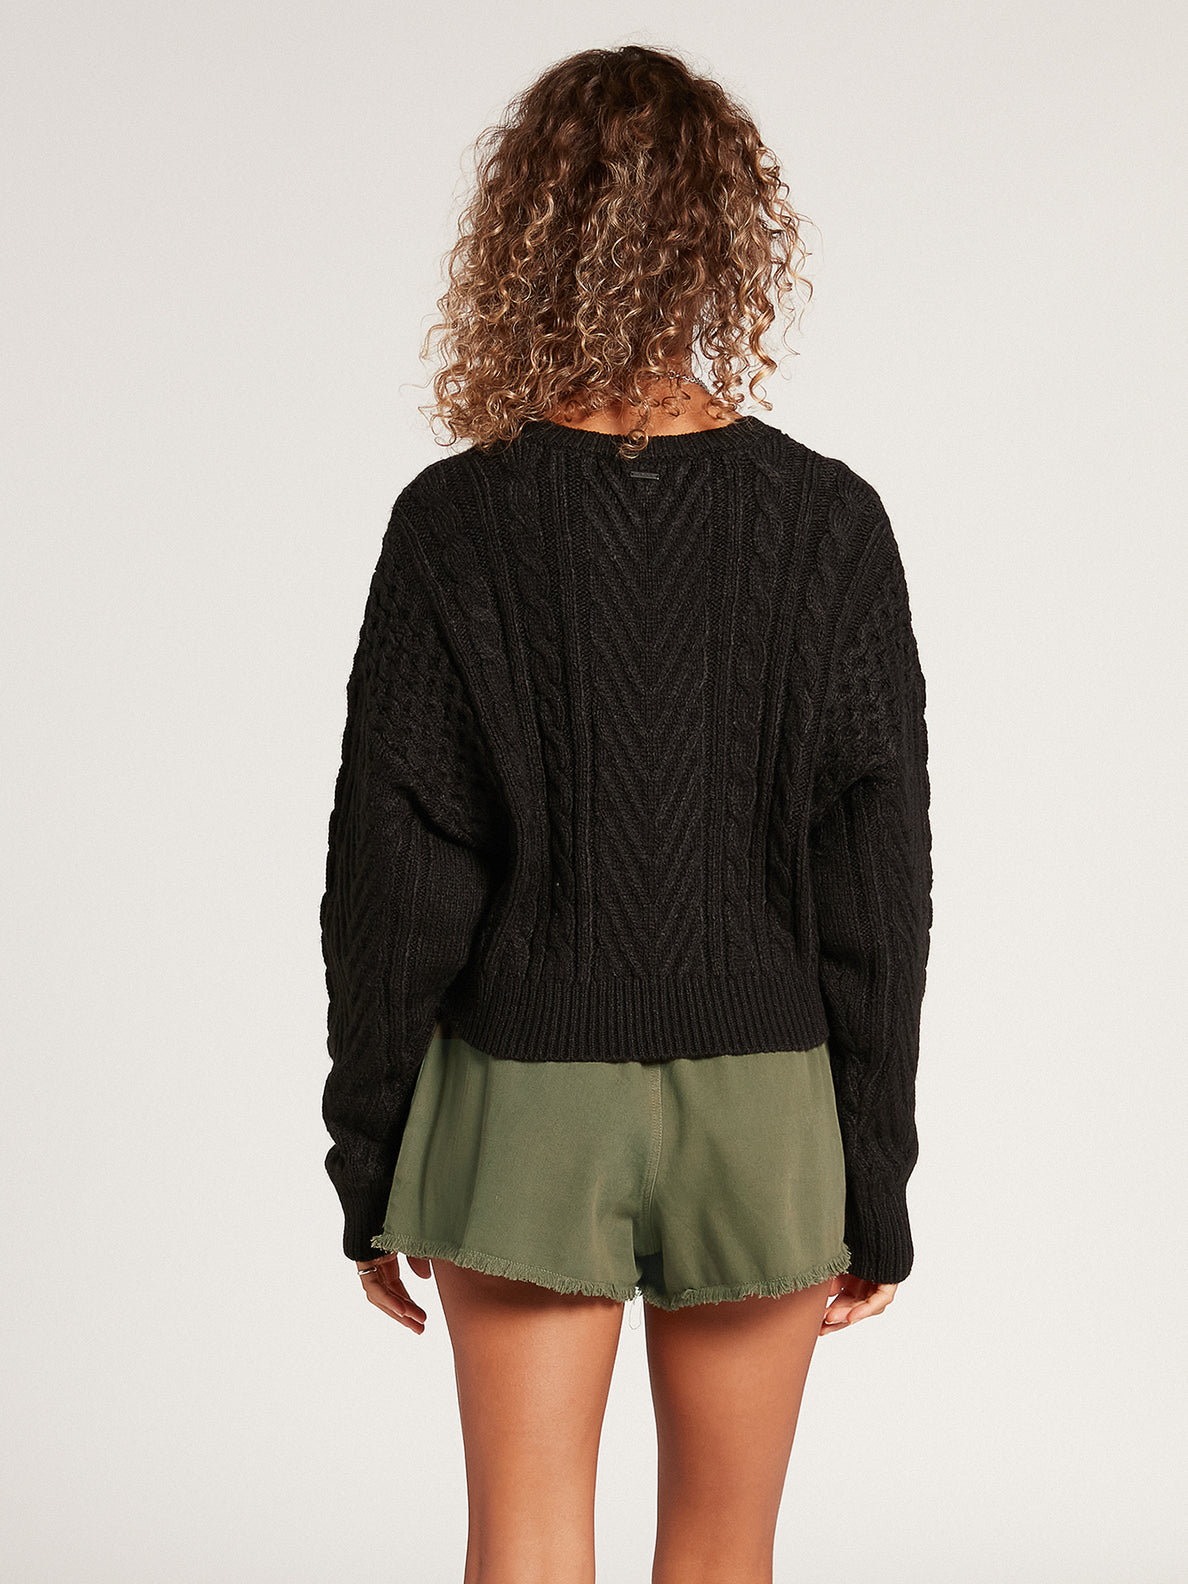 Cabled Babe Sweater Black (B0742002_BLK) [B]